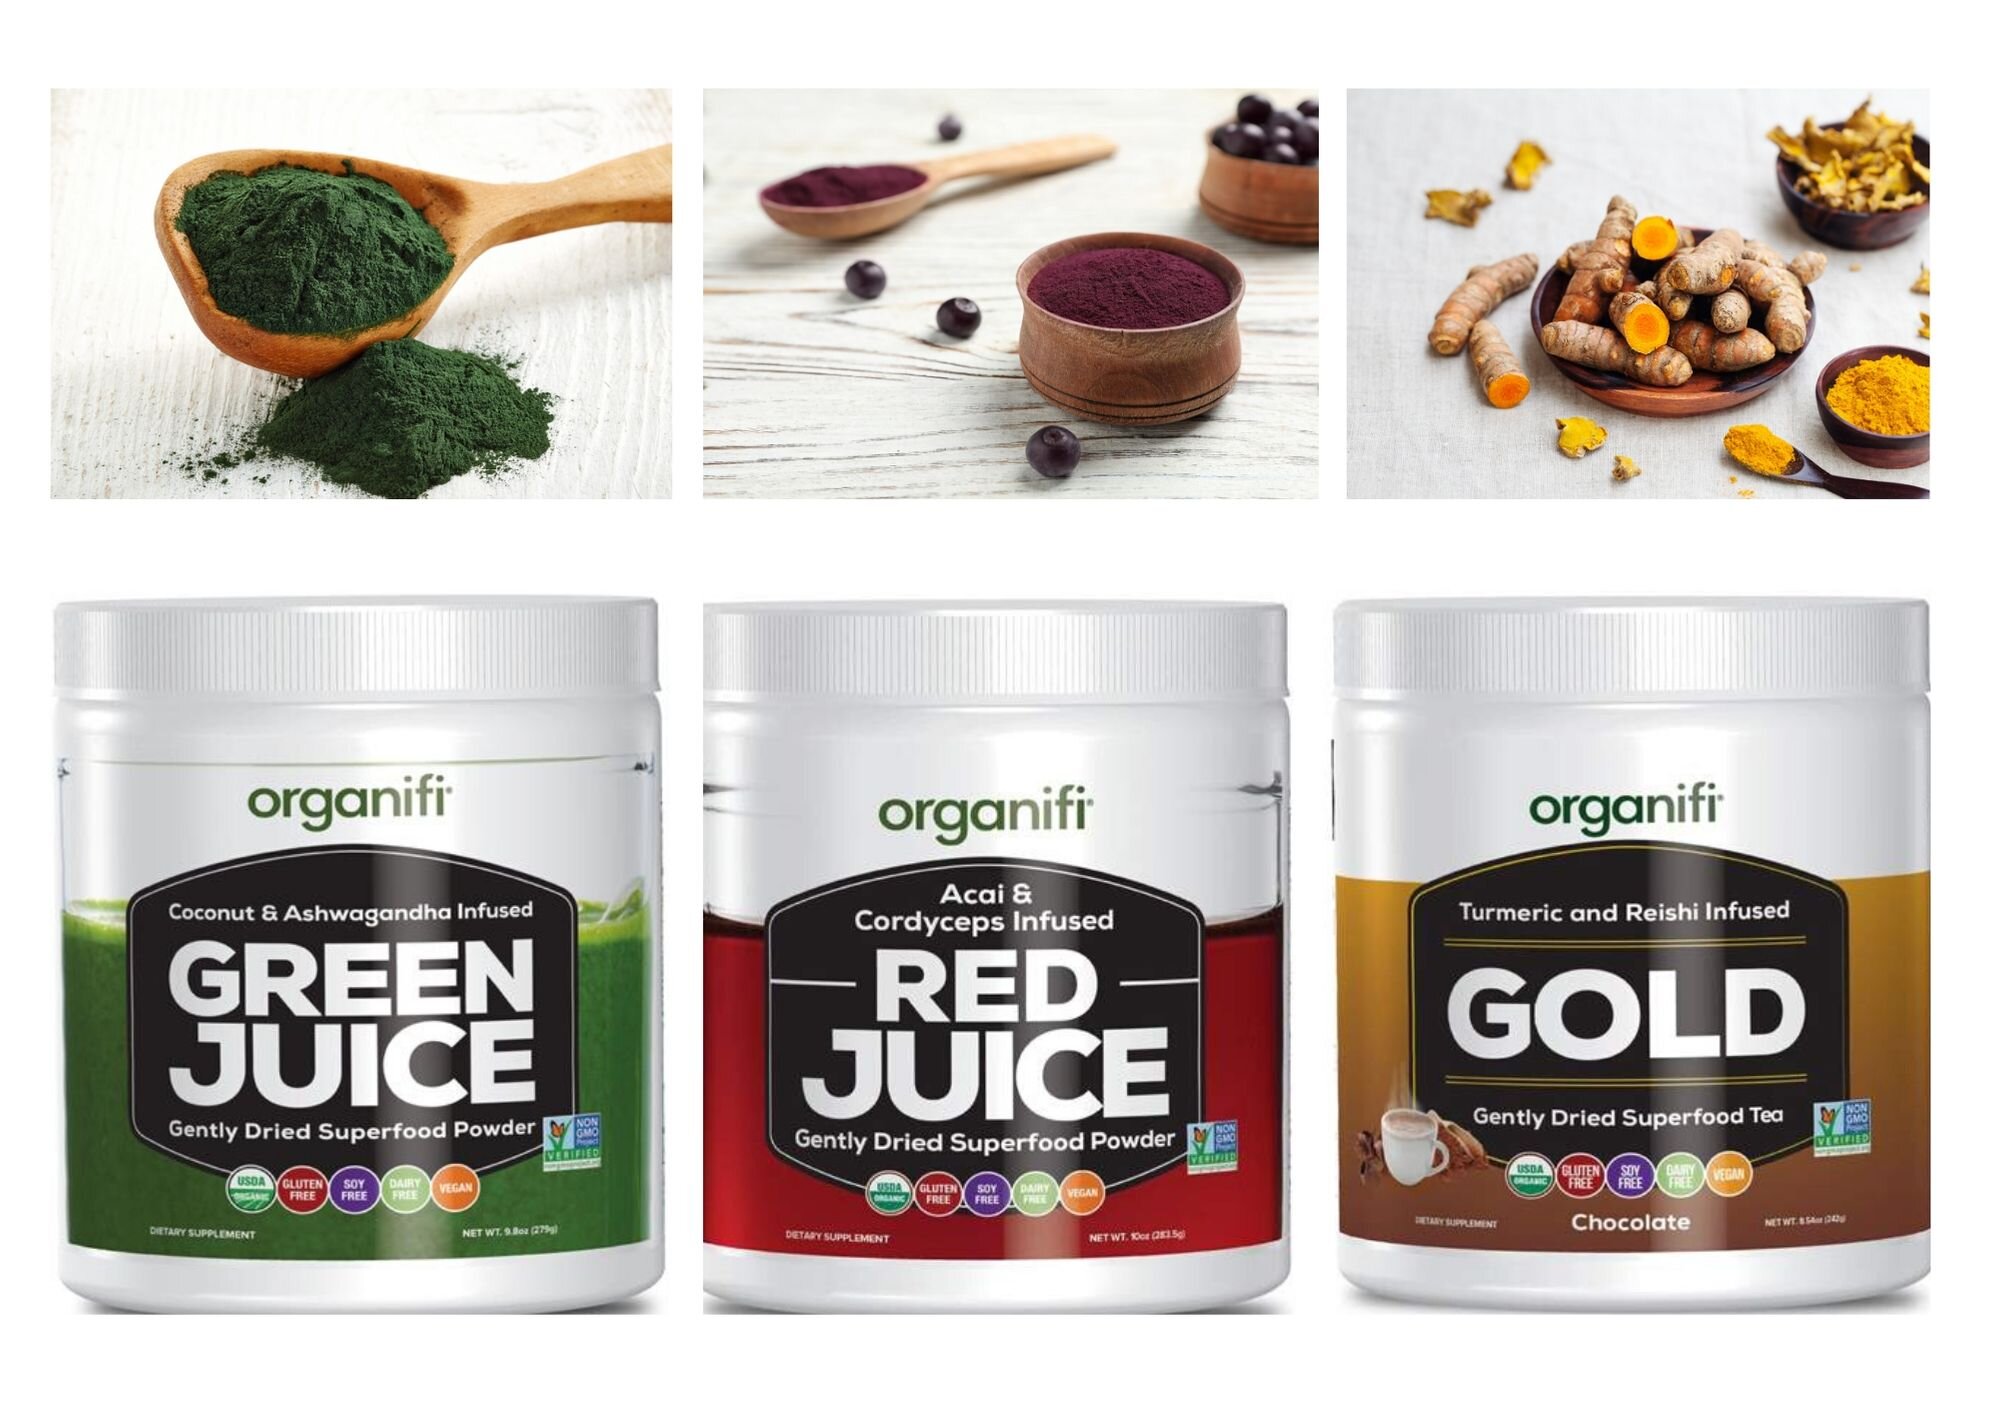 Athletic Greens Vs Organifi Green Juice - Which One Is Best? Things To Know Before You Buy